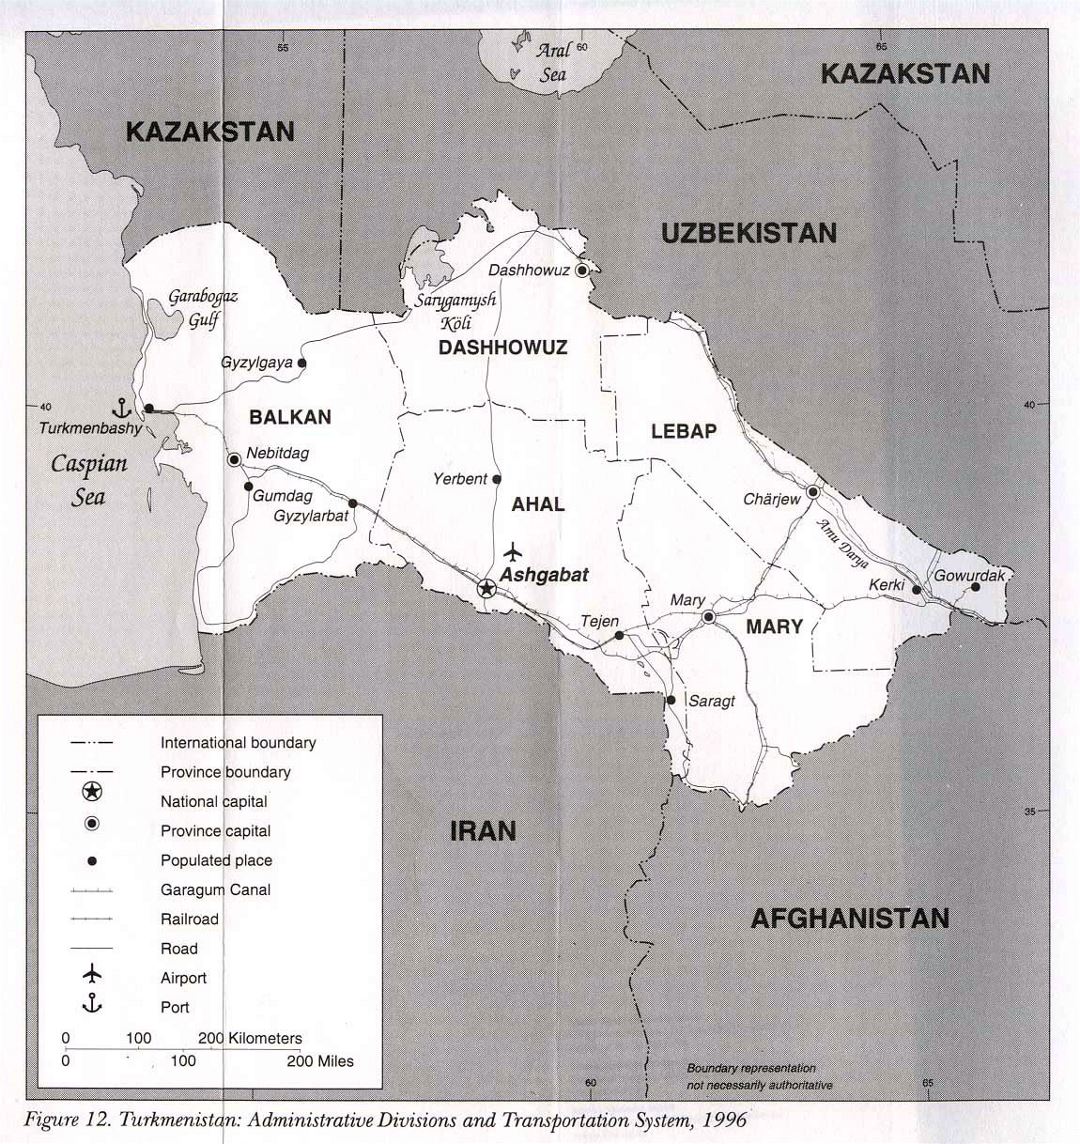 Detailed administrative divisions and transportation system map of Turkmenistan - 1996